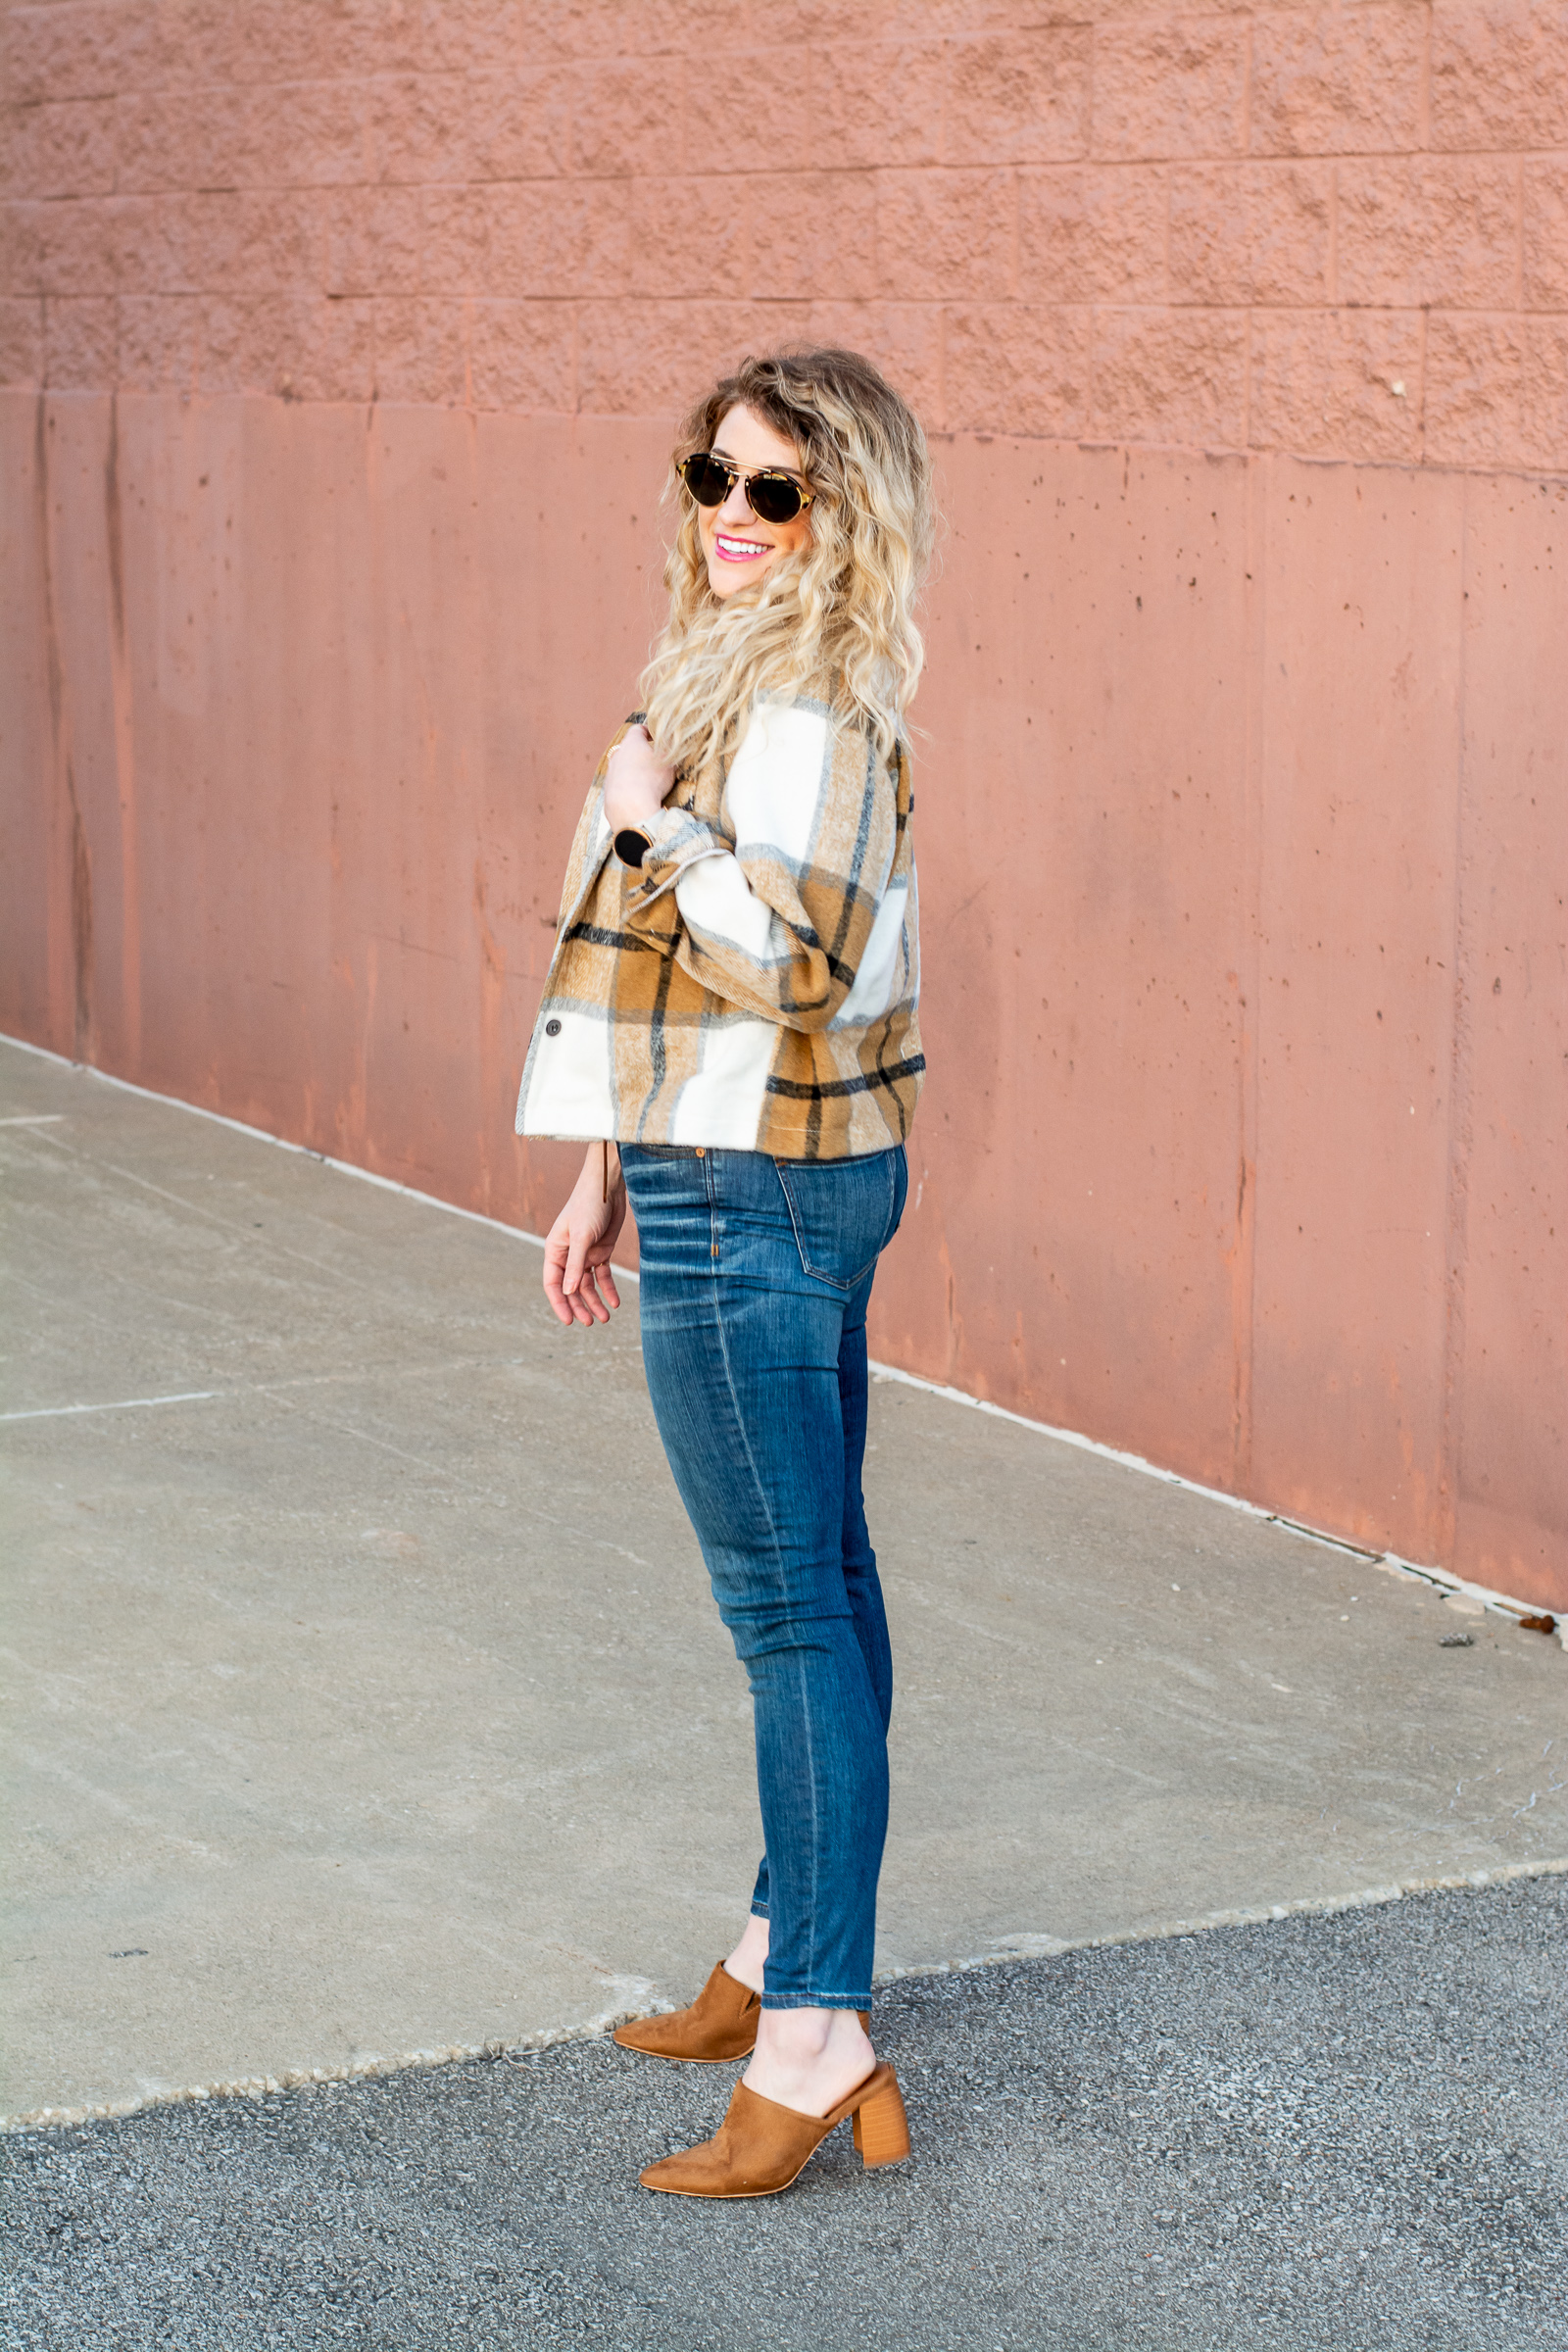 Winter Outfit: The Shacket and High-waisted Jeans. | LSR